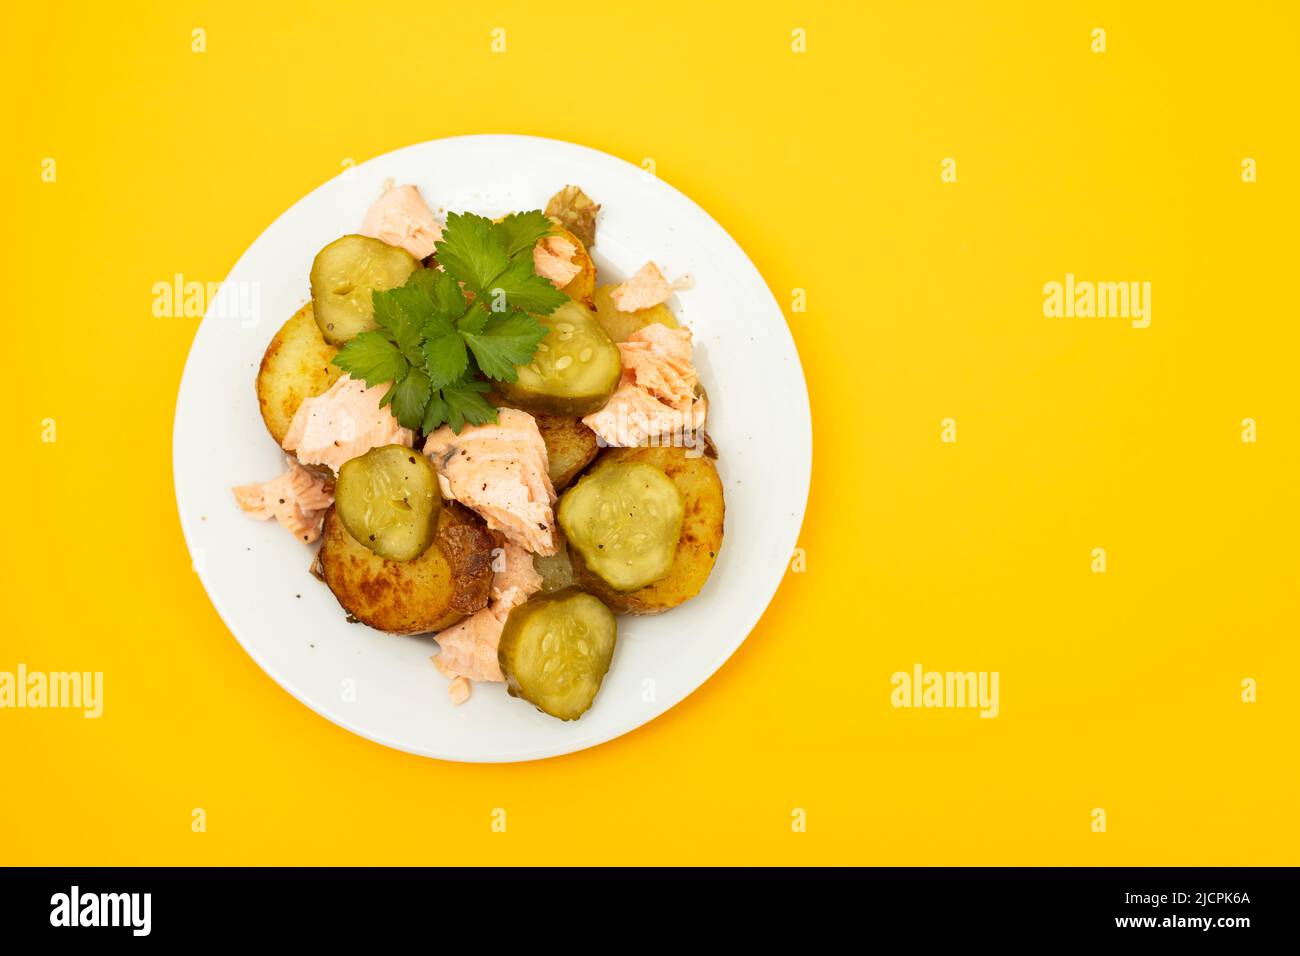 fresh baked salmon with fried potato and cucumber on plate Stock Photo